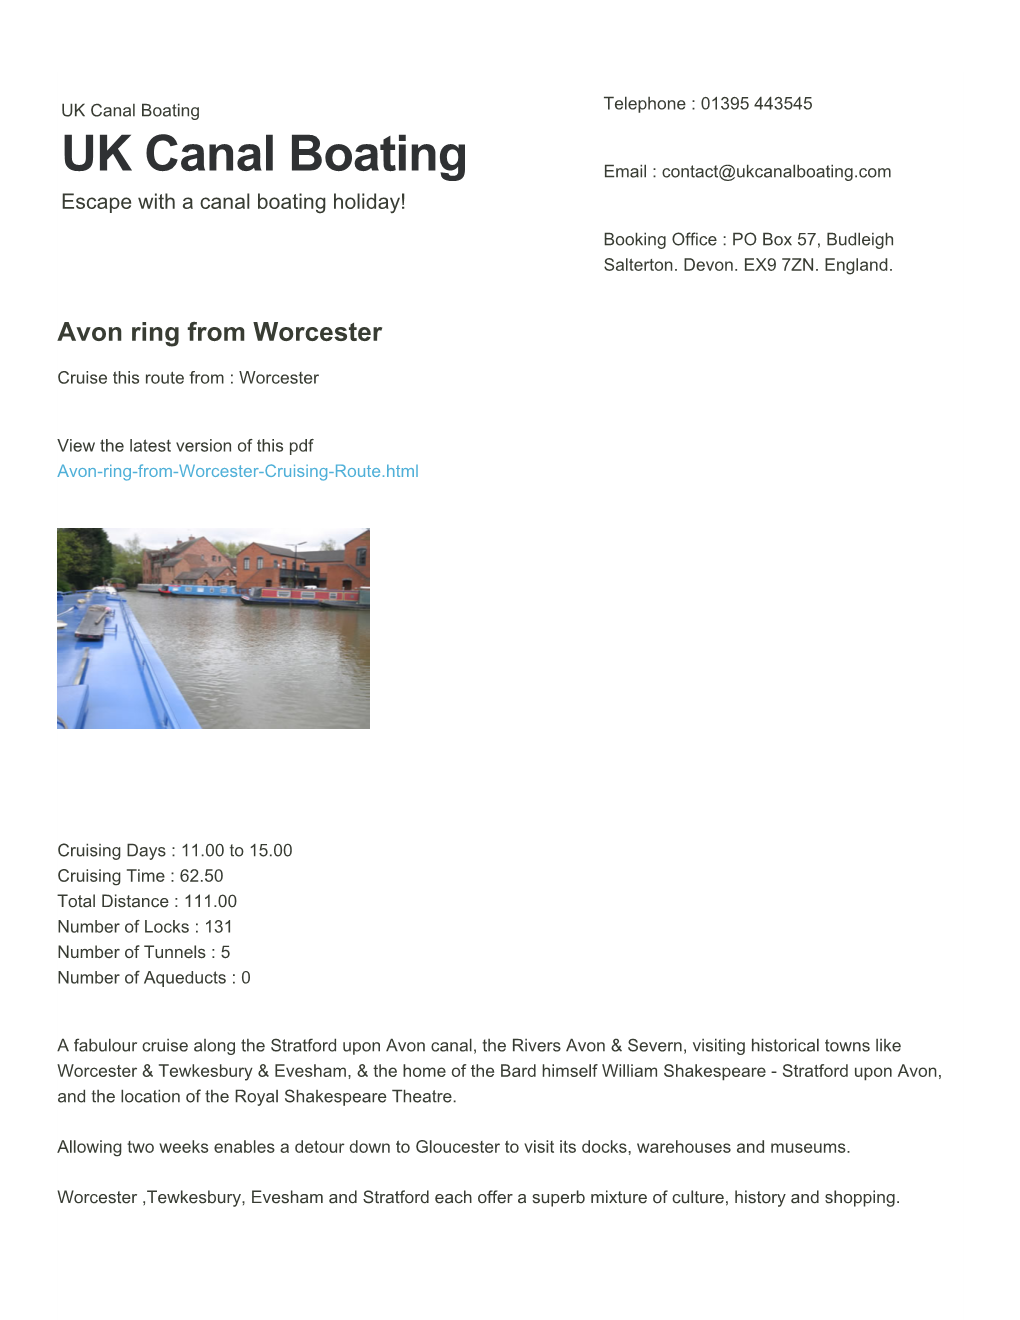 Avon Ring from Worcester | UK Canal Boating